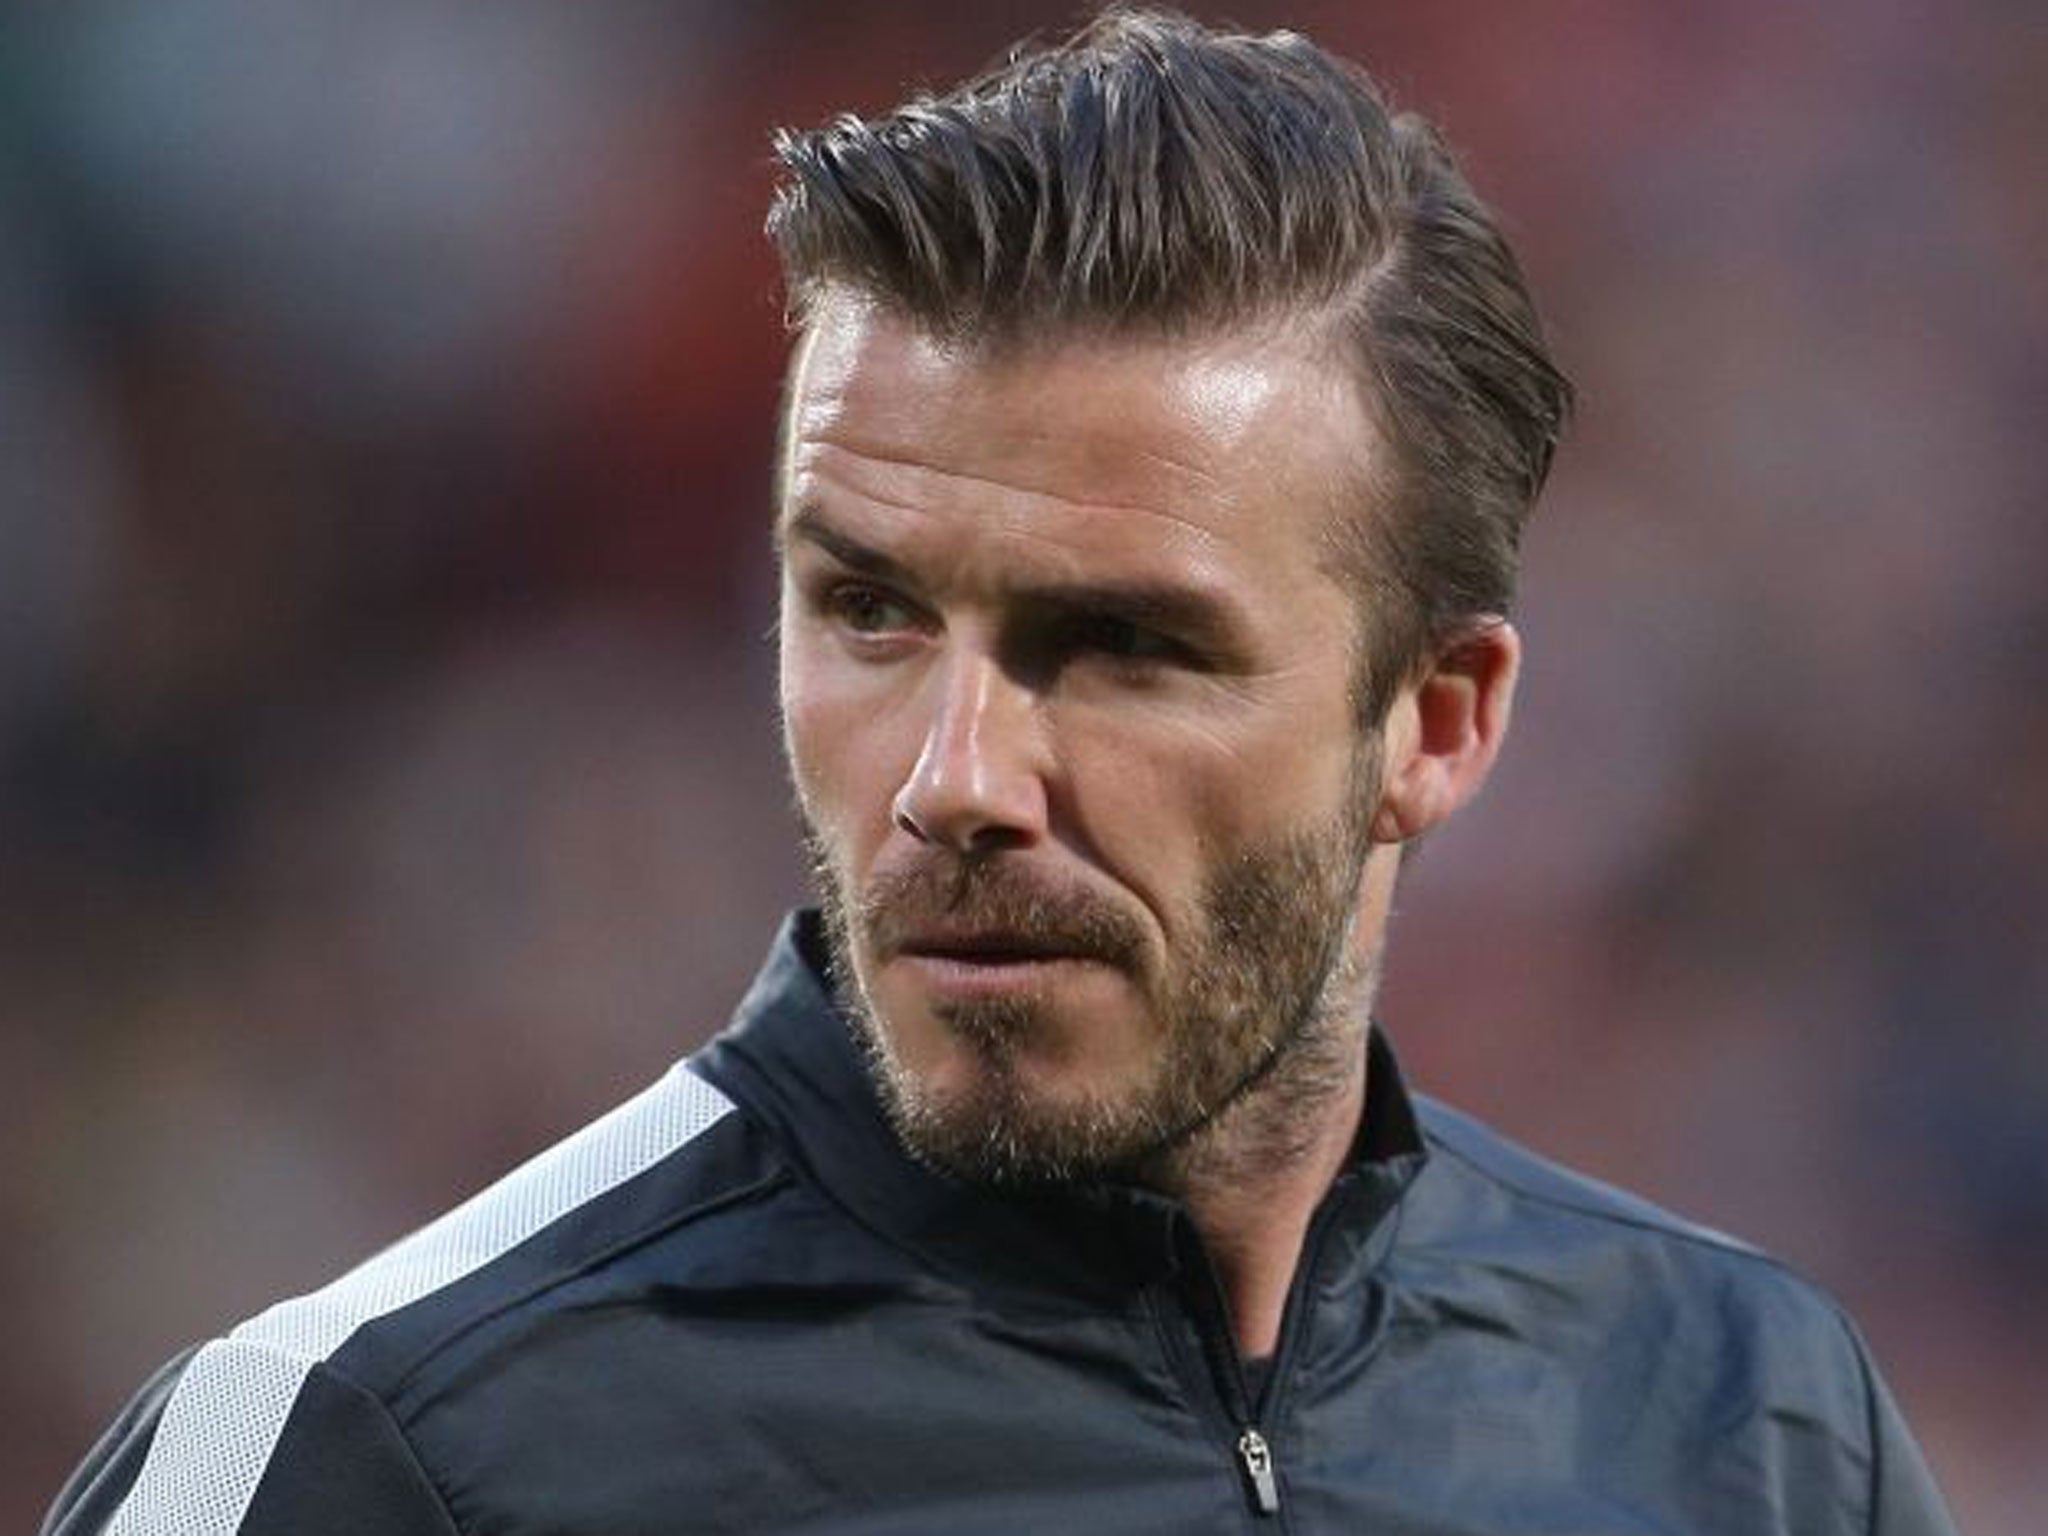 David Beckham retires: football world reacts and pays tribute